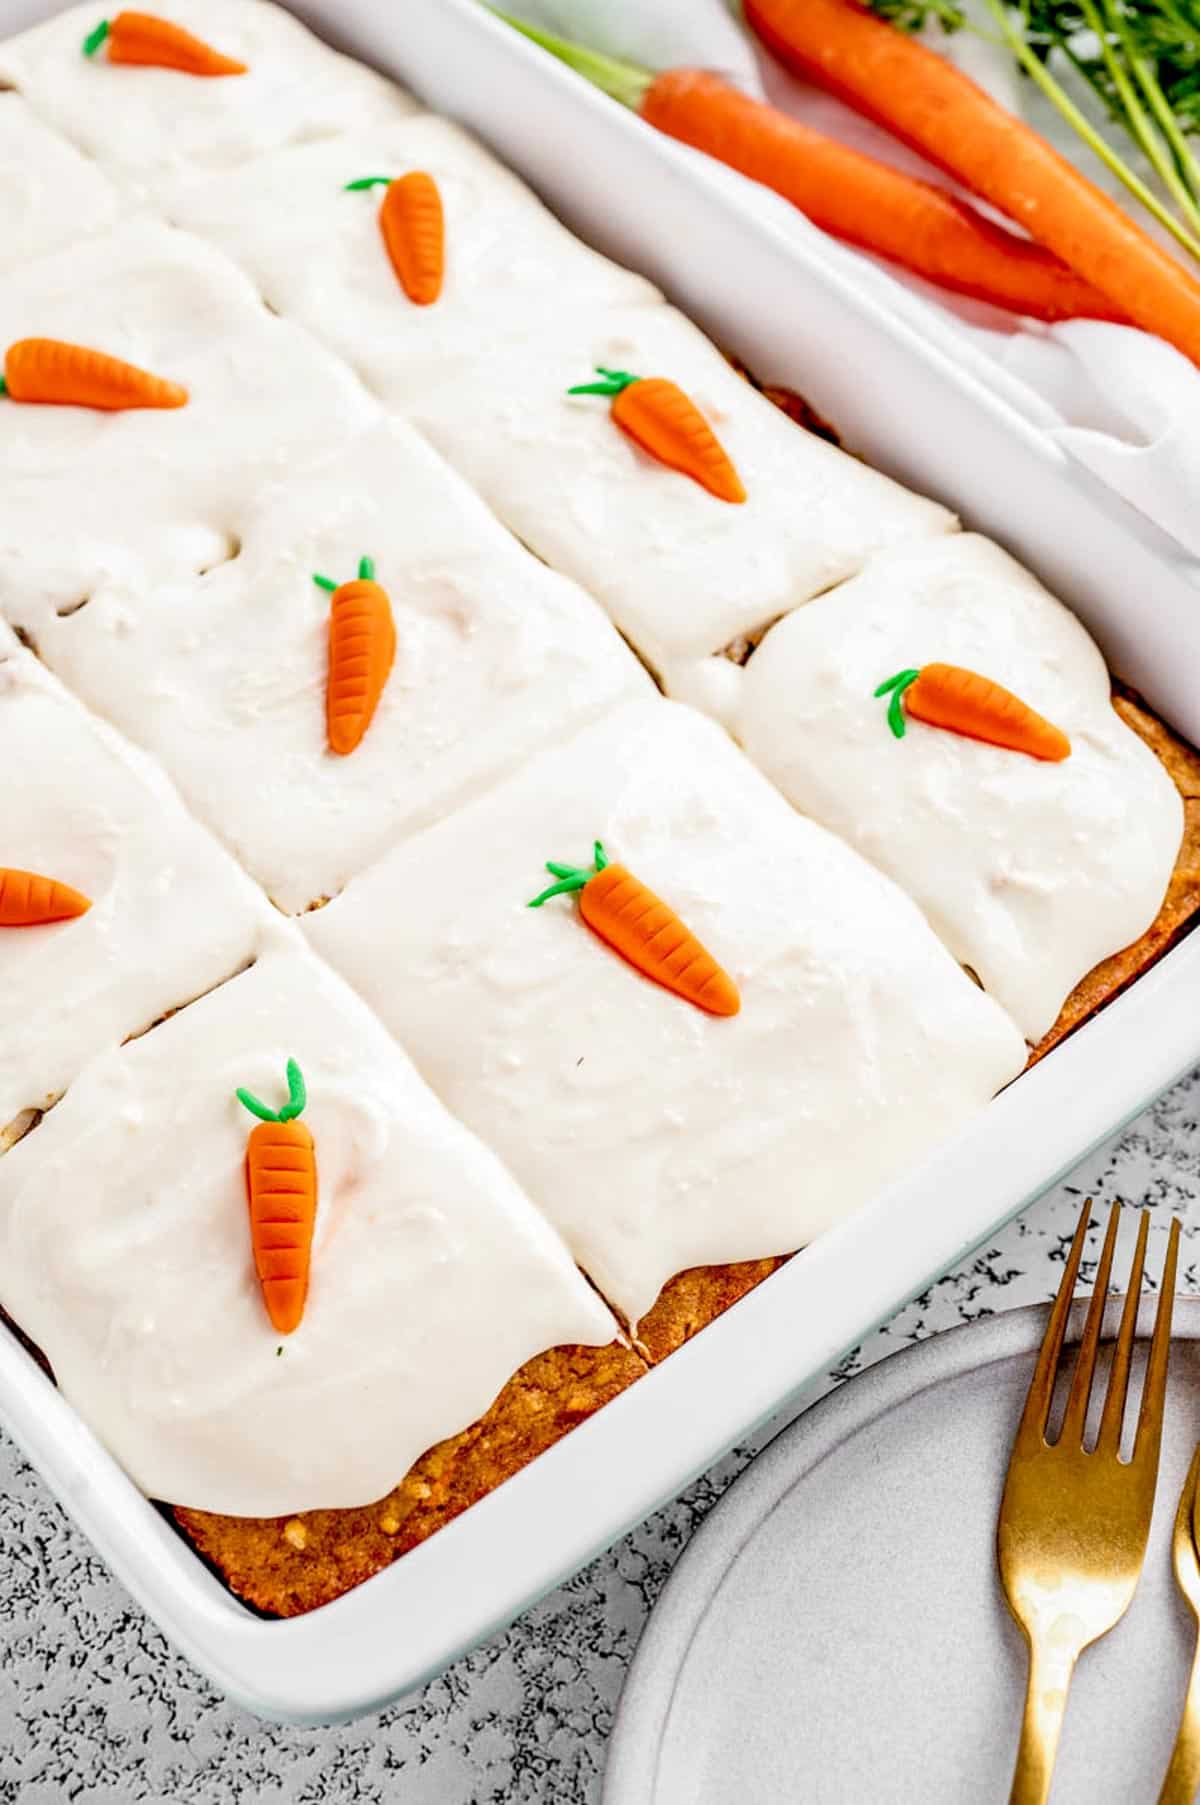 A side shot of healthy carrot cake sliced into pieces in the baking pan.